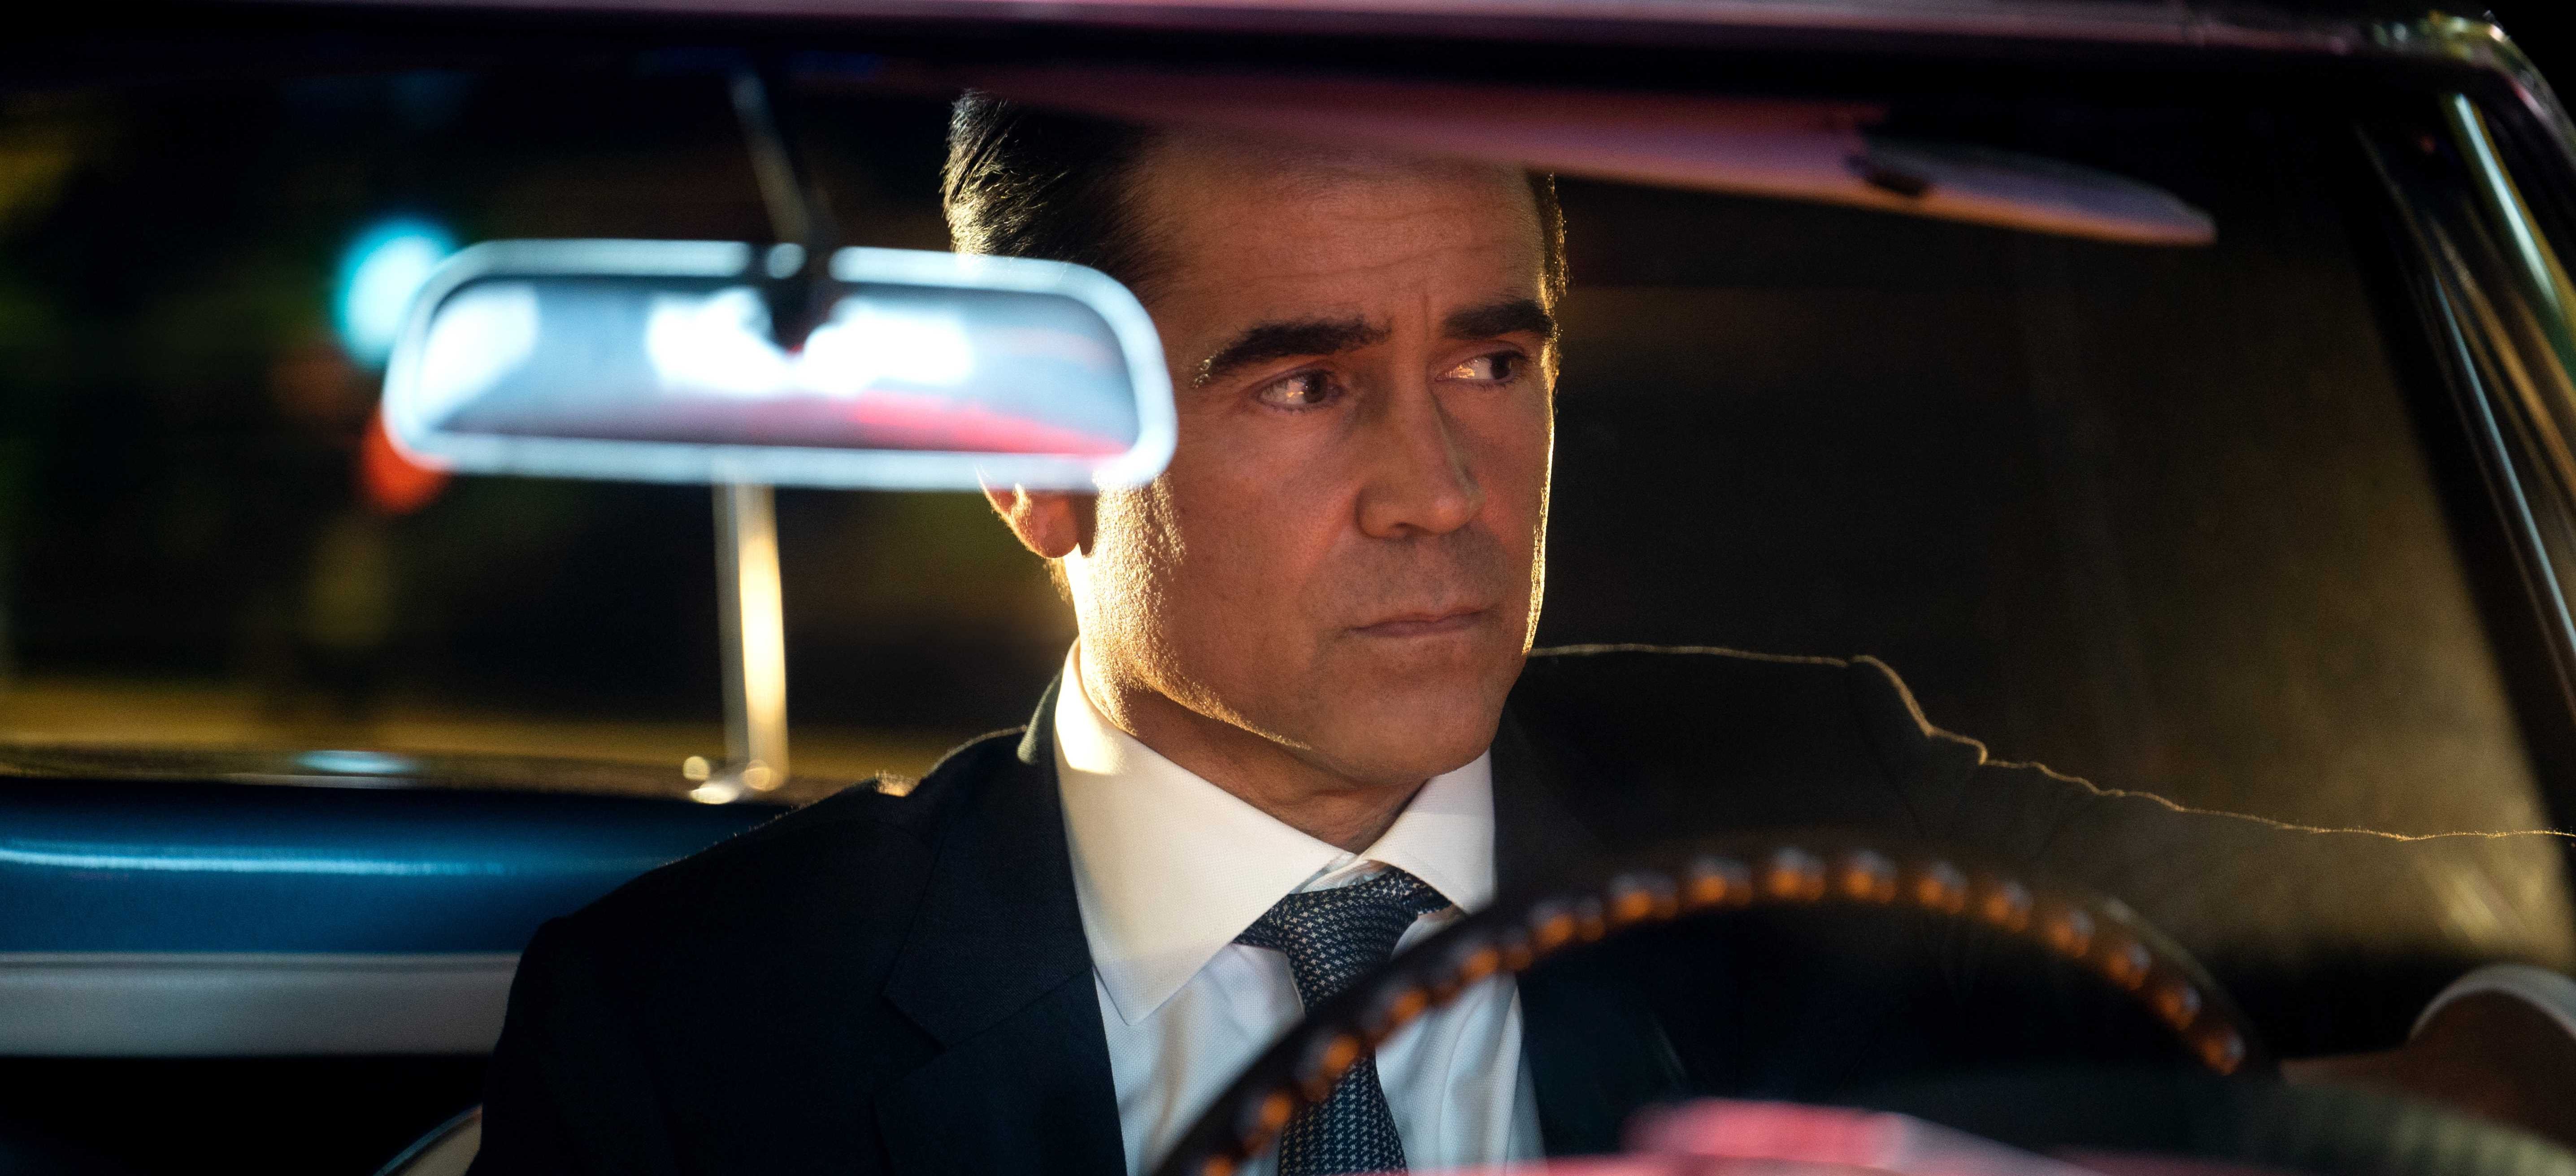 What Car Does Colin Farrell Drive in Sugar?